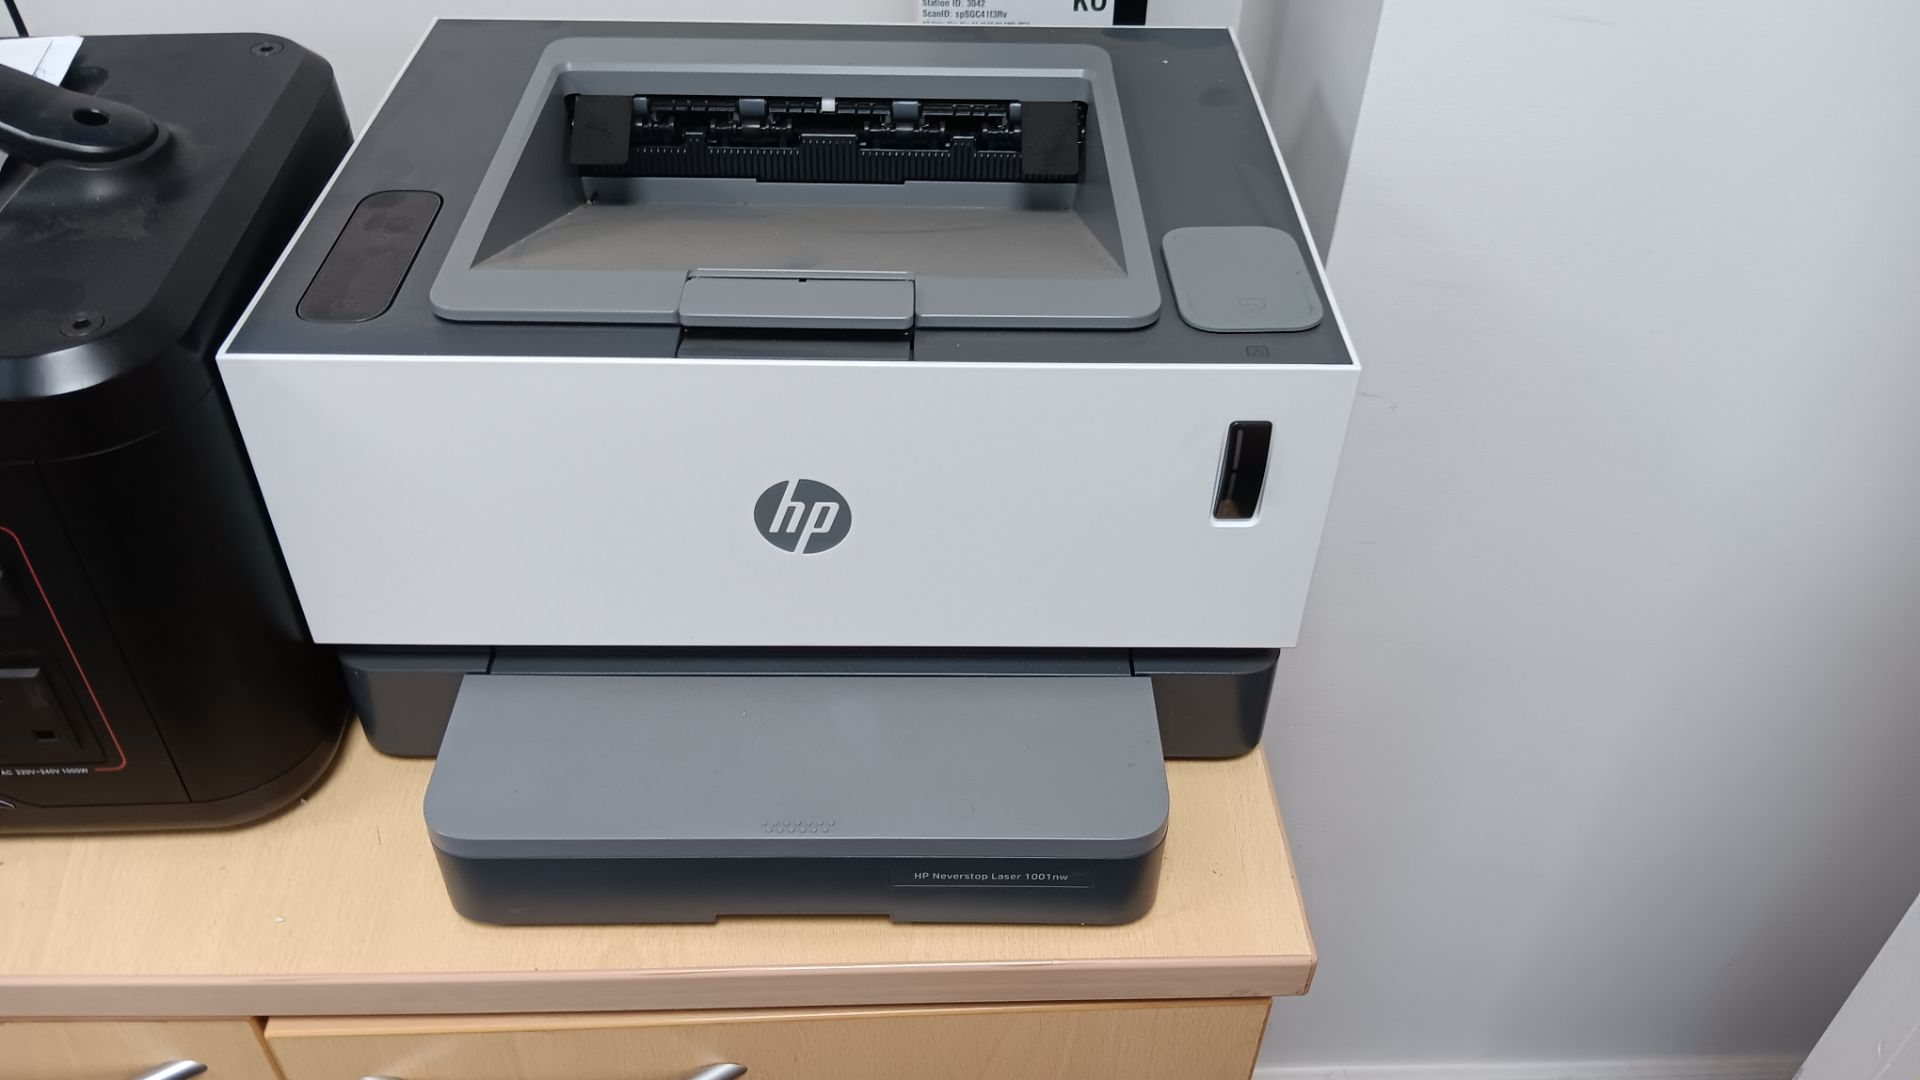 HP Neverstop Laser 1001nw mono wireless laser printer, serial number CNBRP2V1SN (Feb 2021) – Located